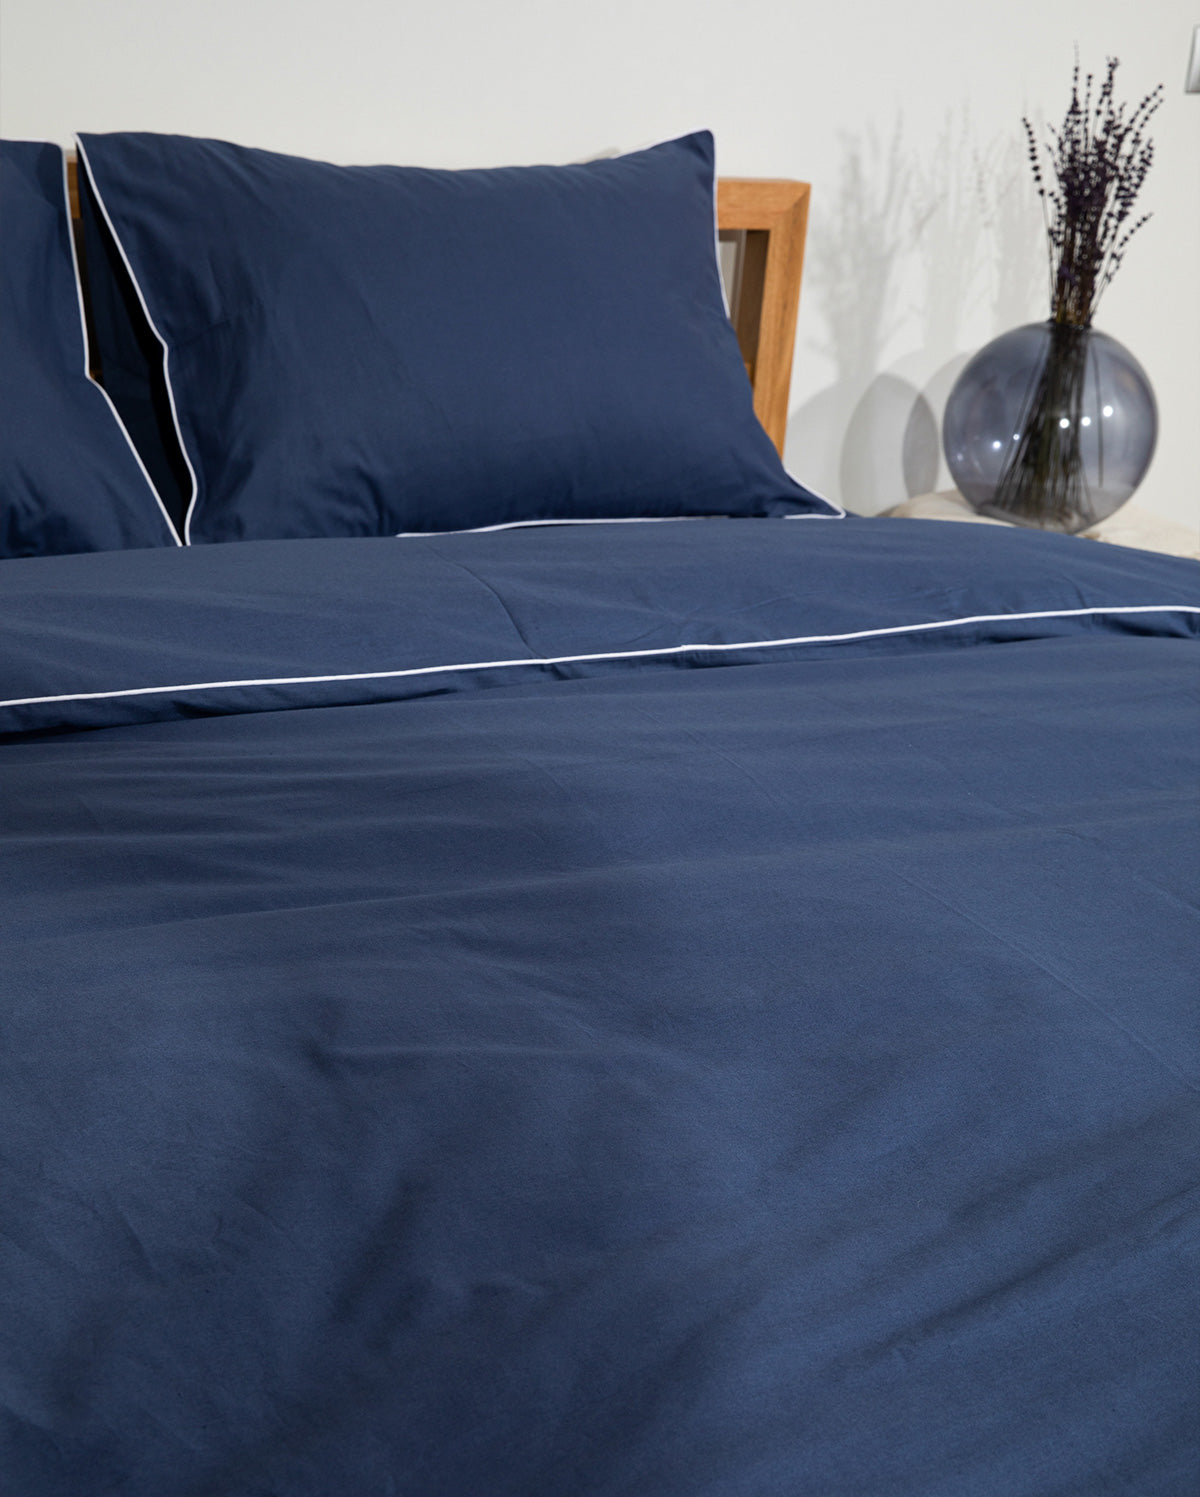 Classic Percale Duvet Cover- Navy Blue with White Piped Edge